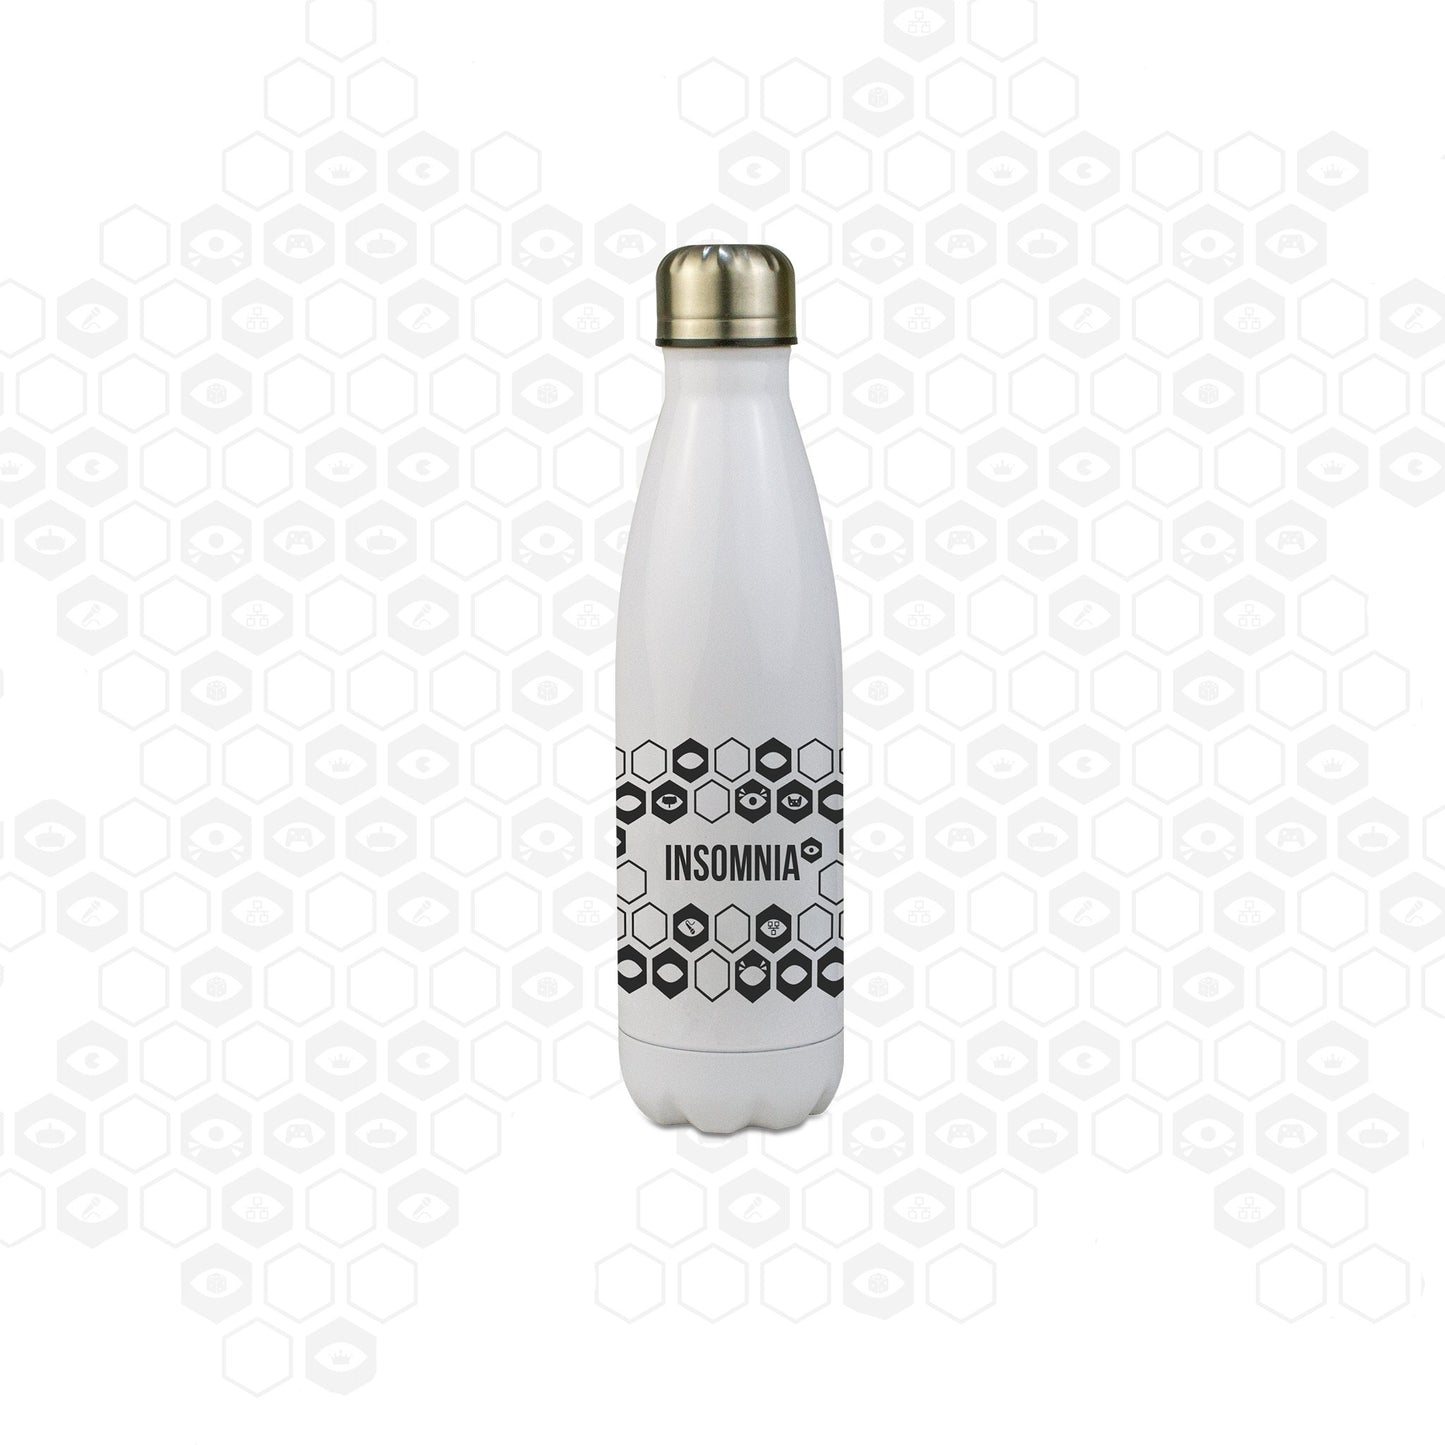 White stainless steel water botle with printed Insomnia logo design